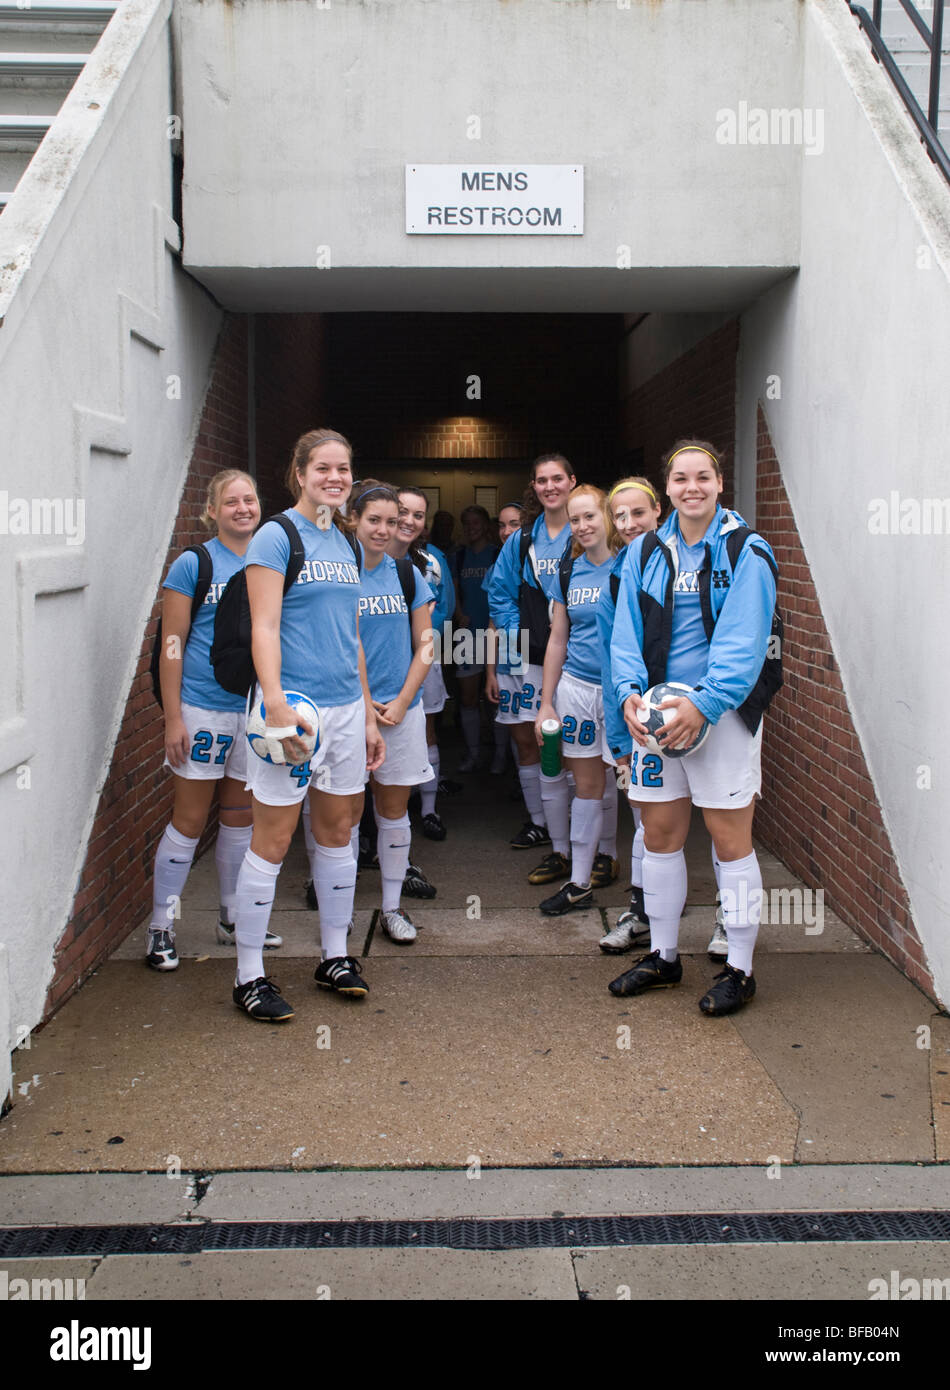 The girl's soccer team at Johns Hopkins University pose for a pre-game shot before going out onto the field. Stock Photo